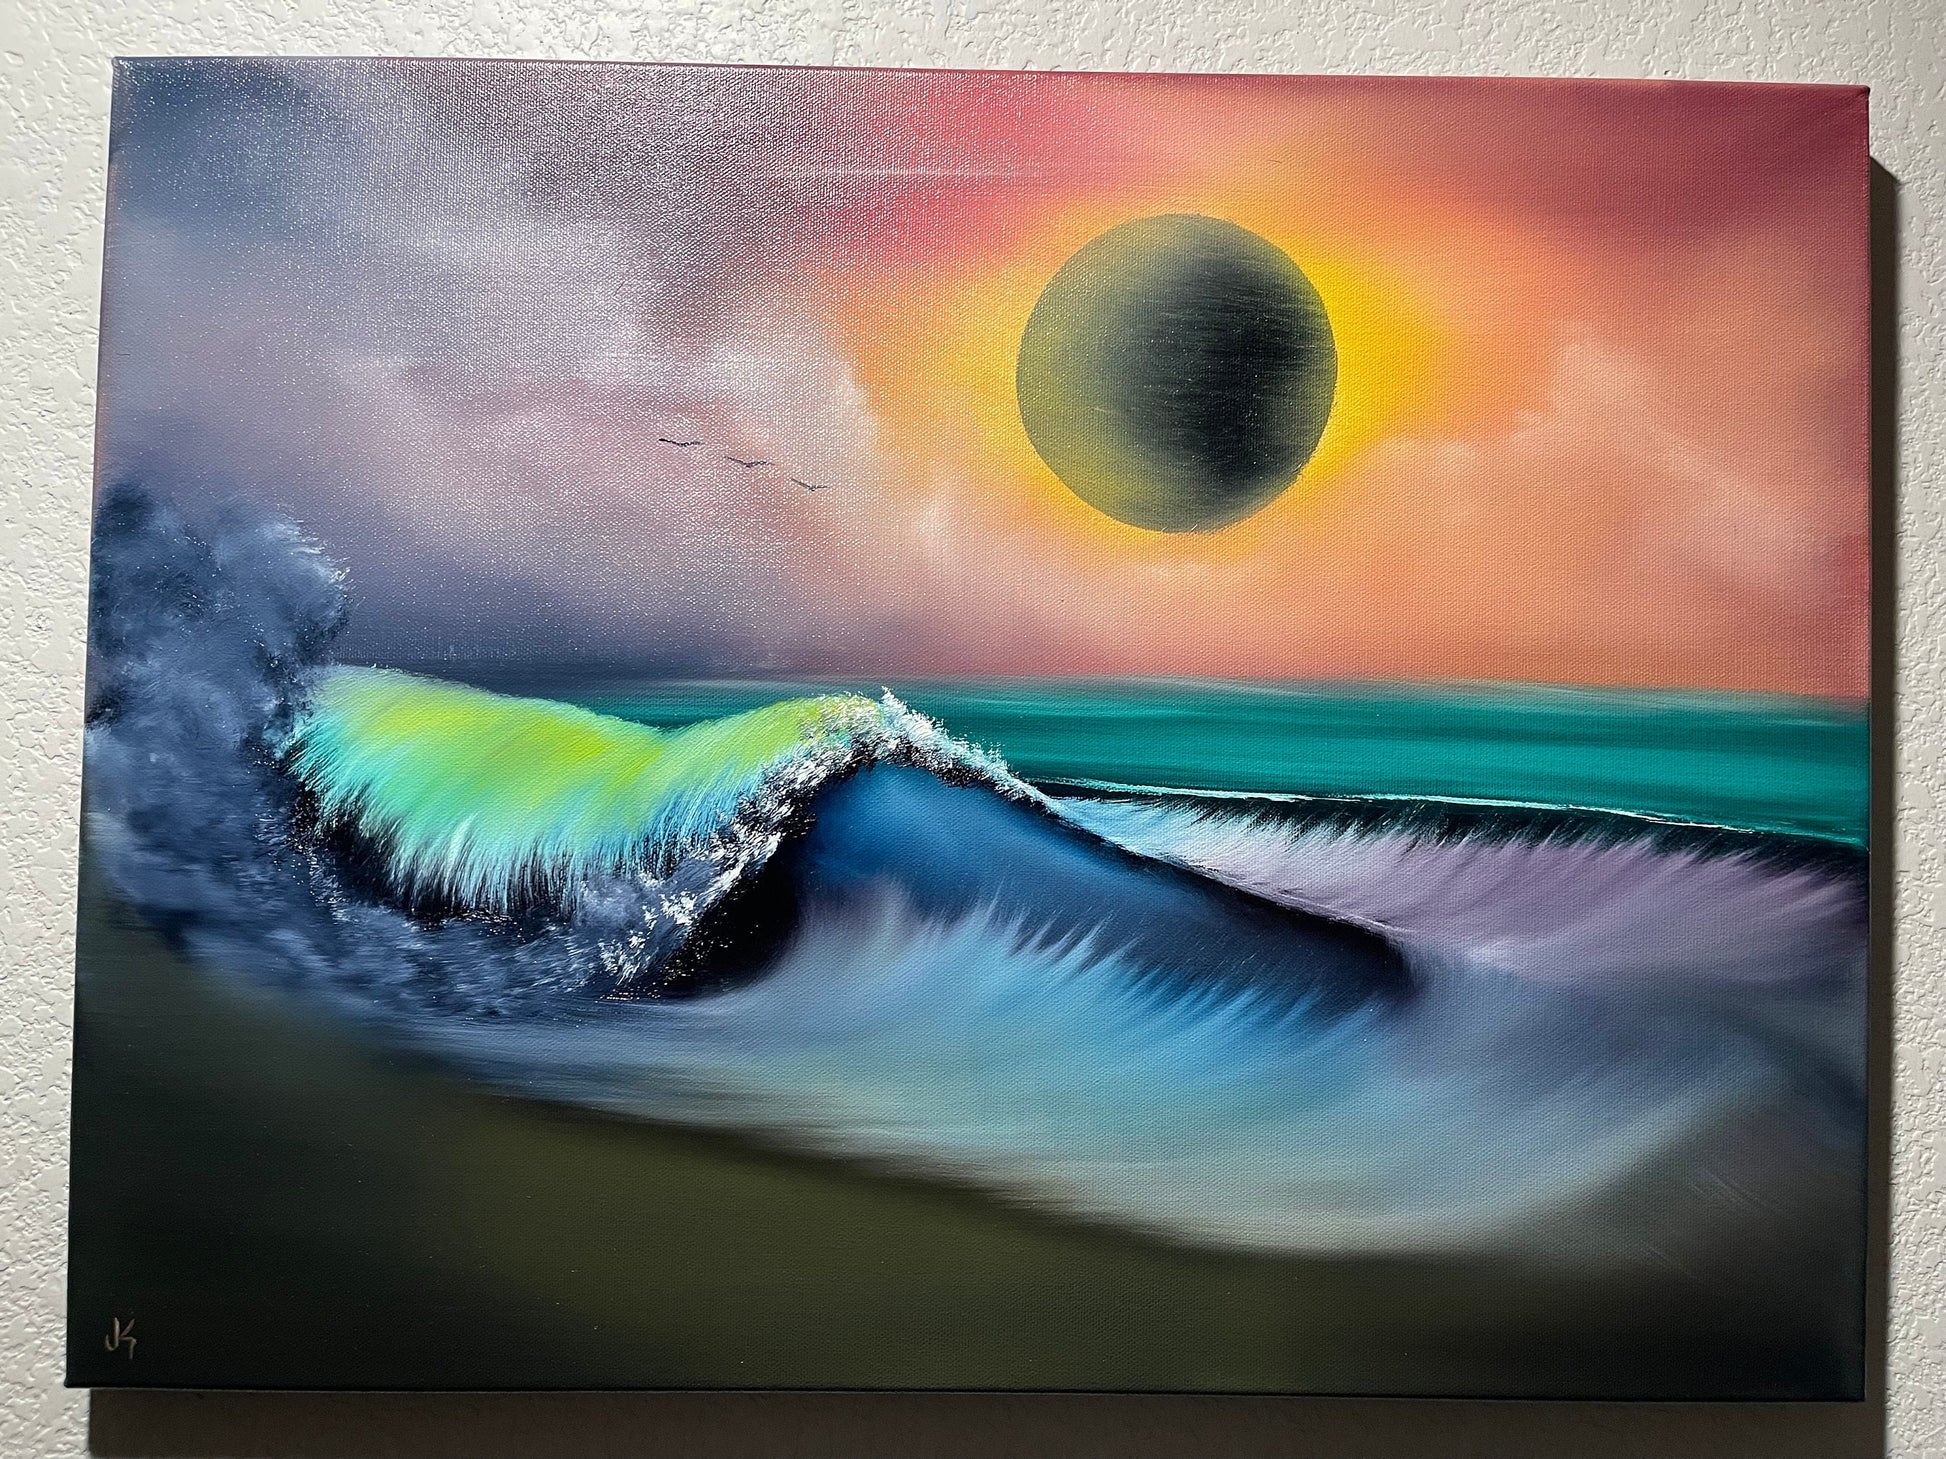 Painting 737 - 18x24" Sunset Eclipse Seascape - Total Eclipse of the Art - painted Live on 4/27/23 by PaintWithJosh